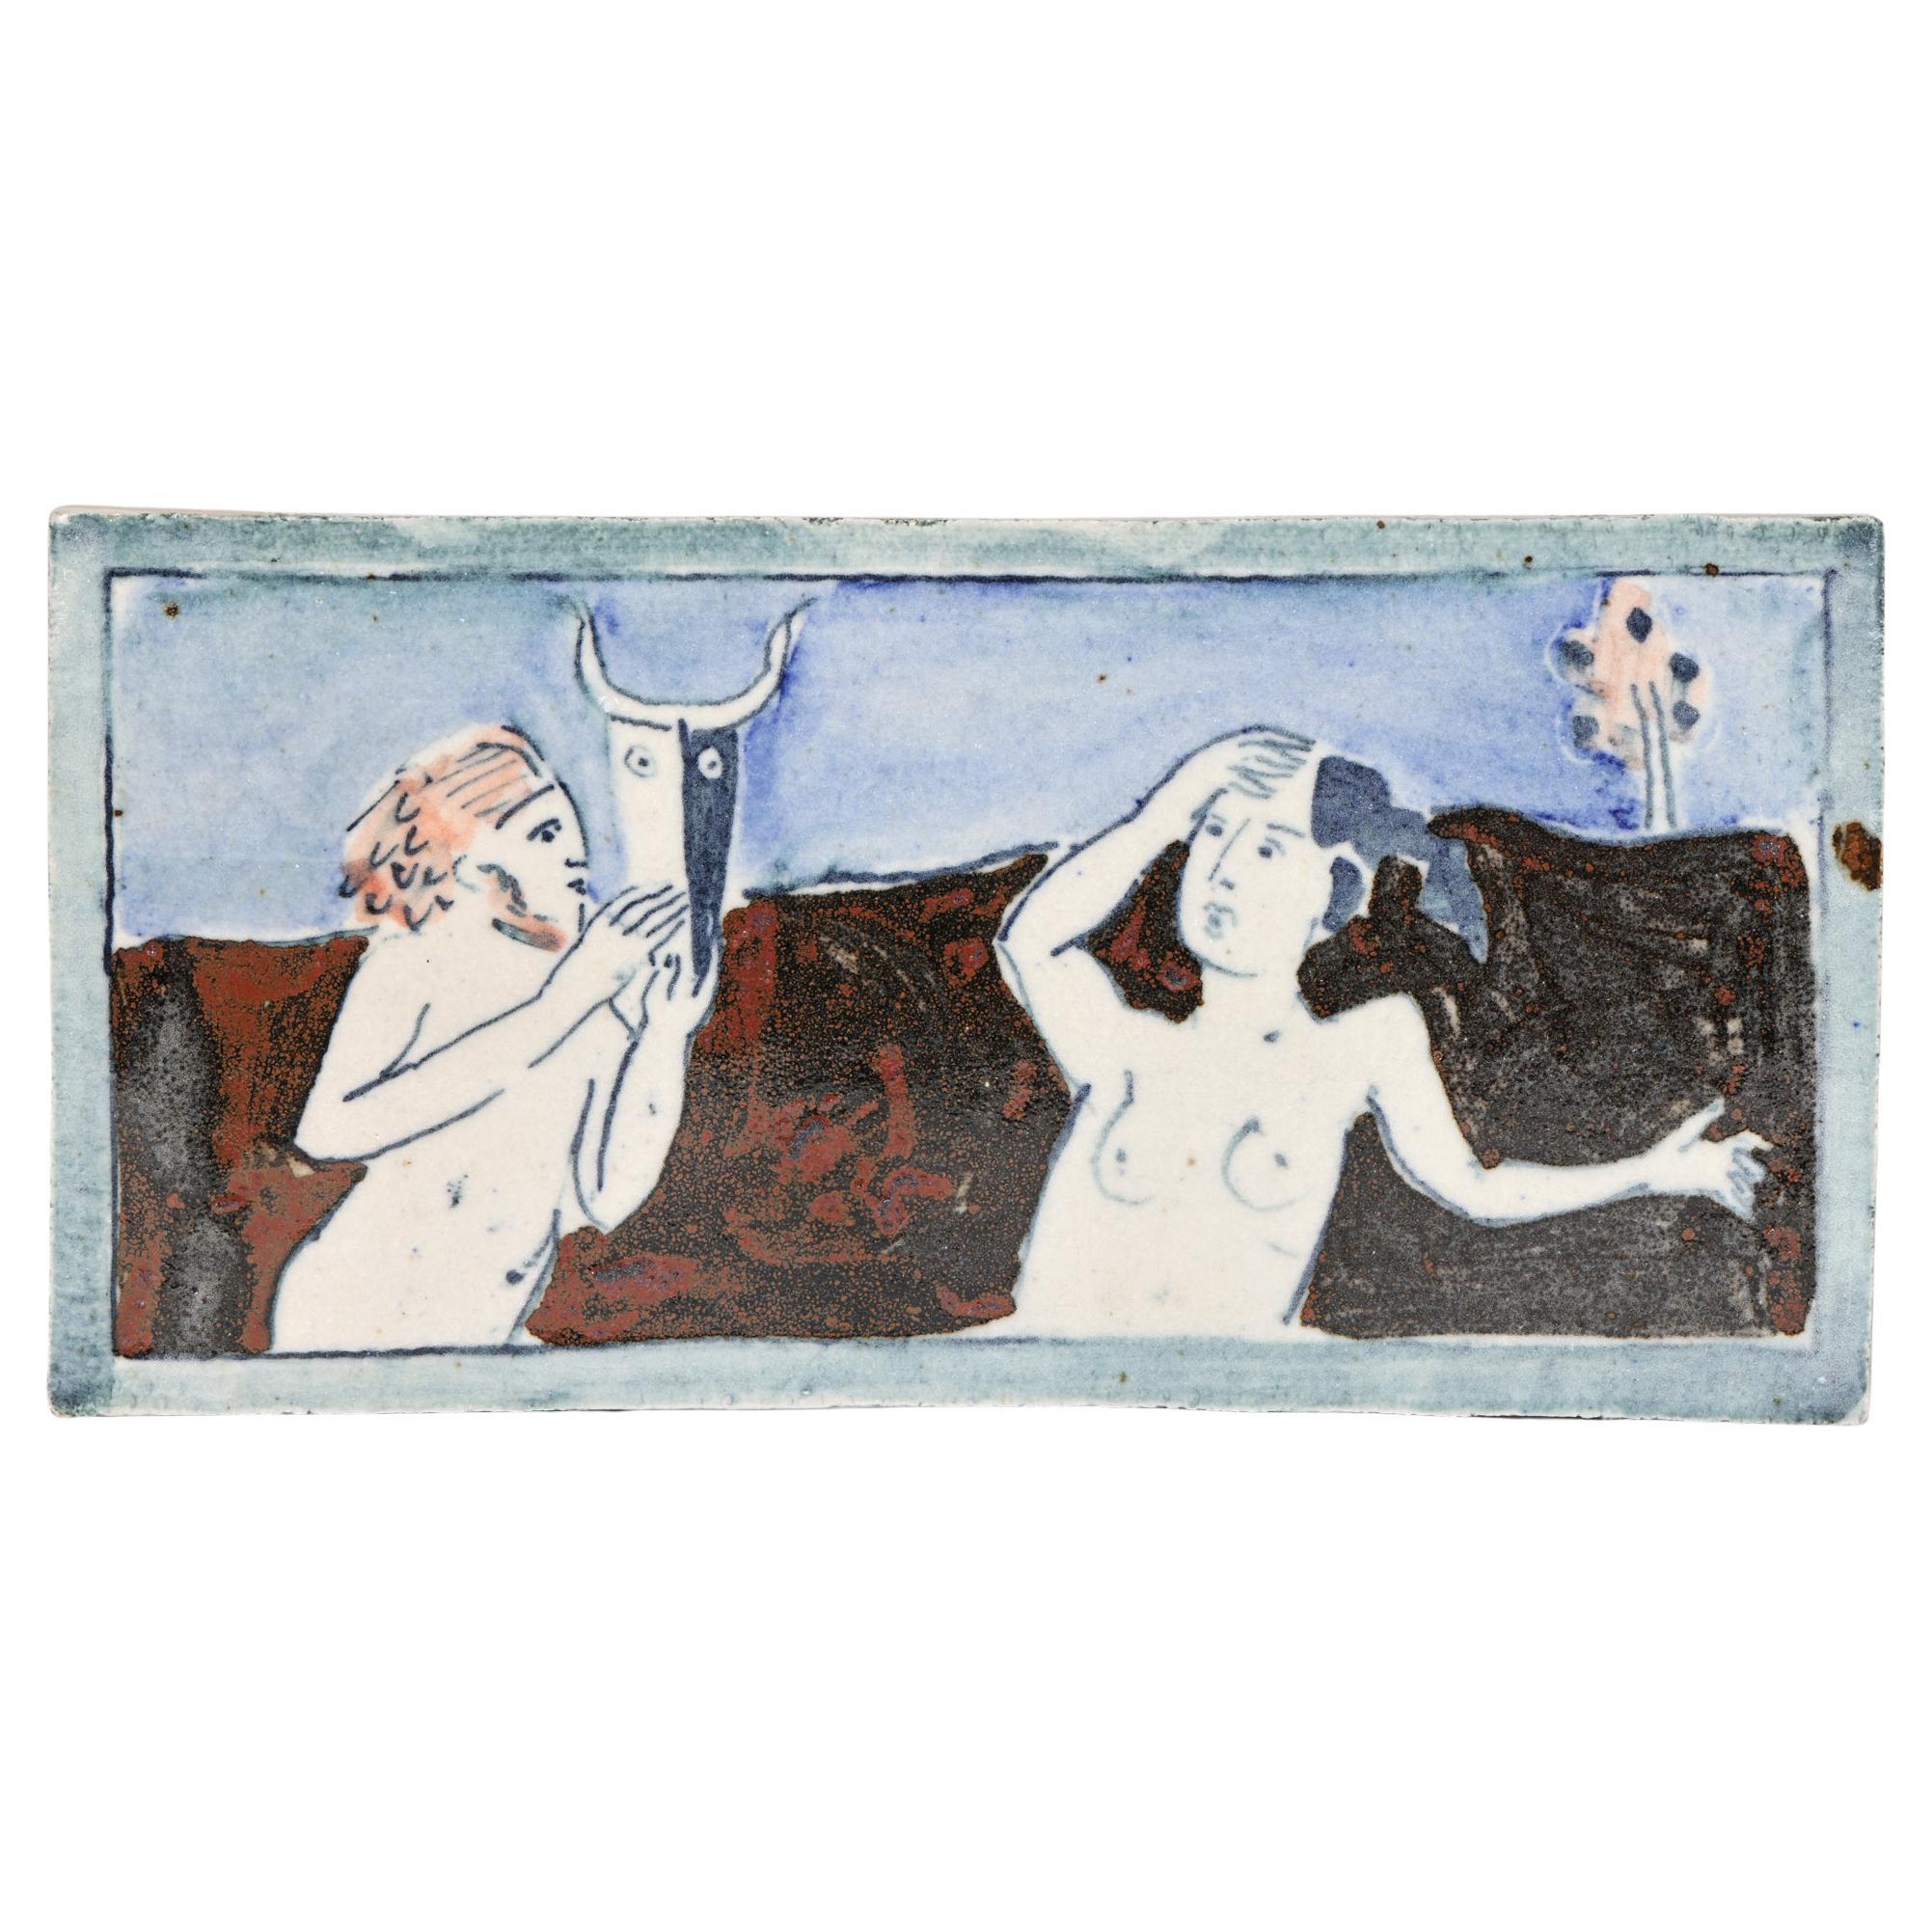 Eric James Mellon Studio Pottery Tile with Nudes Titled Europa & The Bull